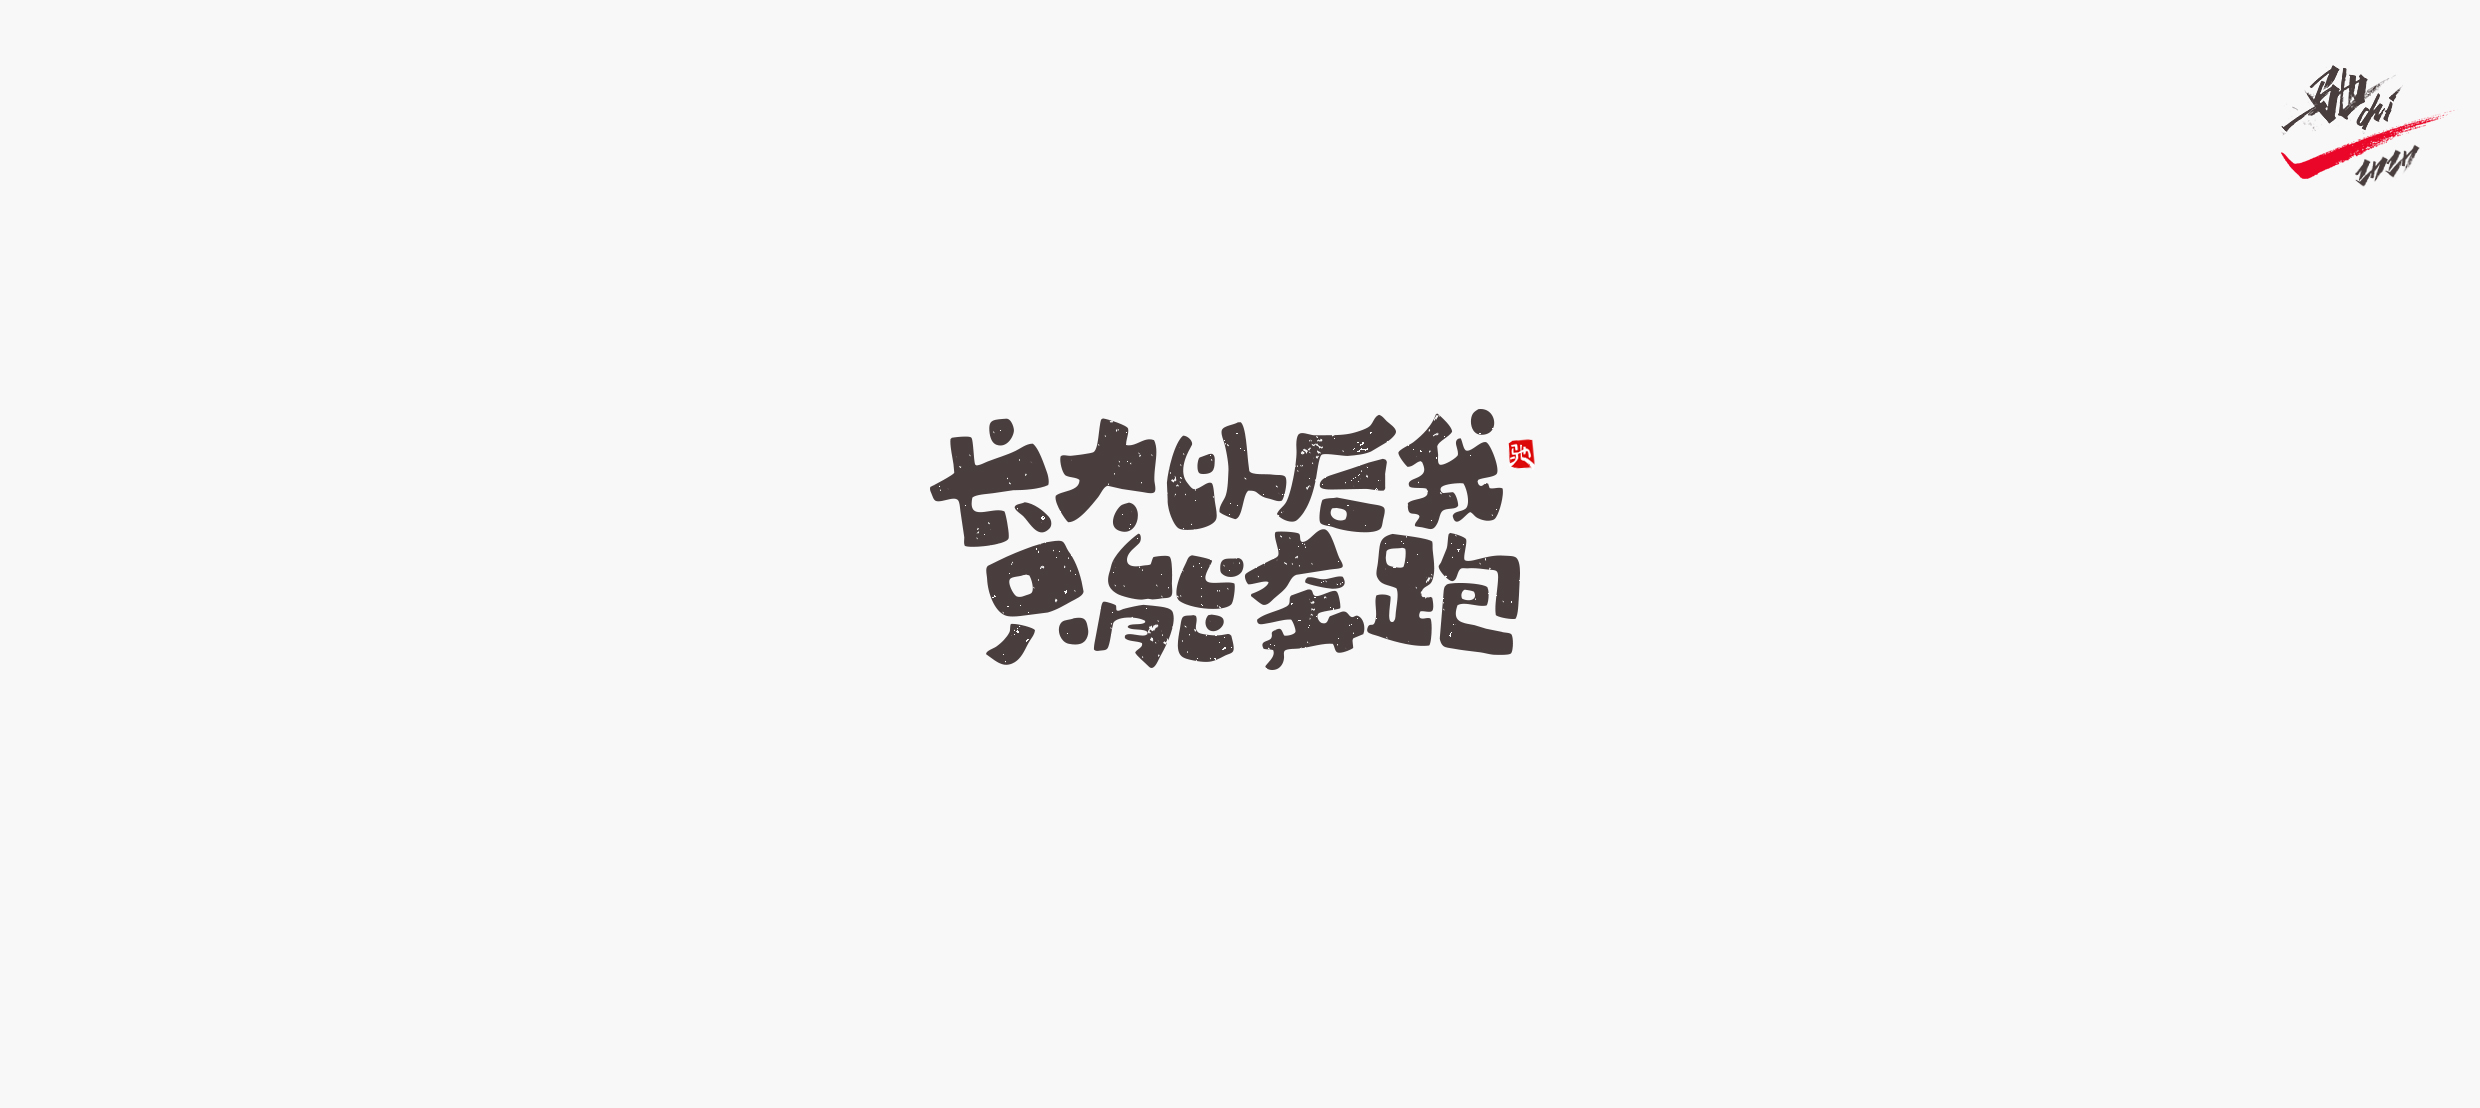 Interesting Chinese Creative Font Design-Inspirational song